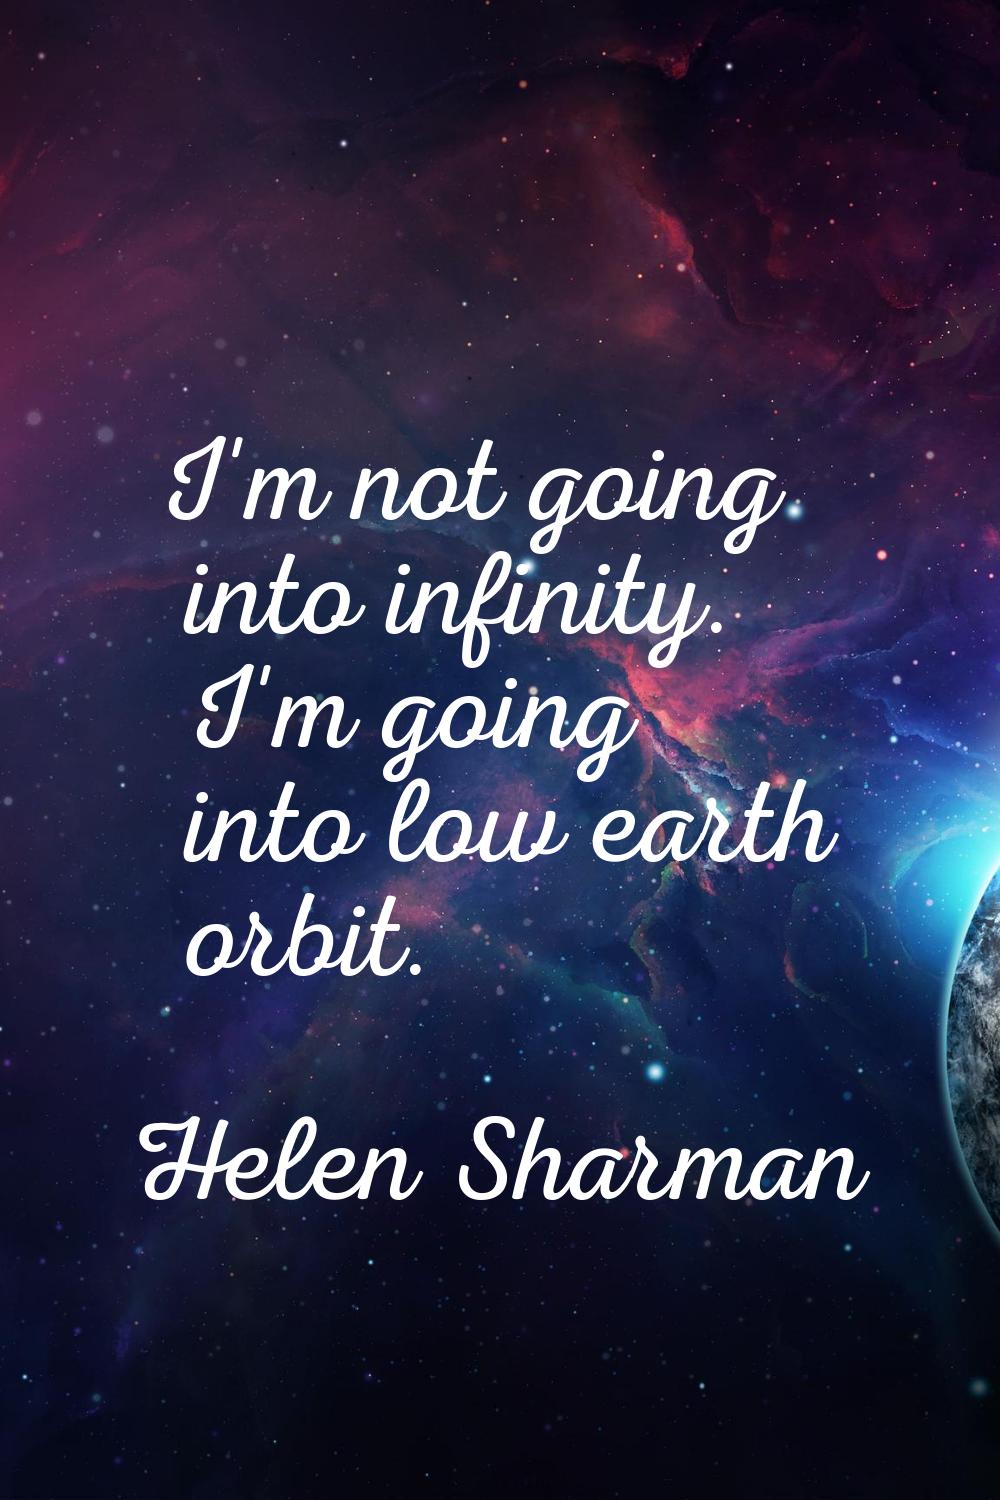 I'm not going into infinity. I'm going into low earth orbit.